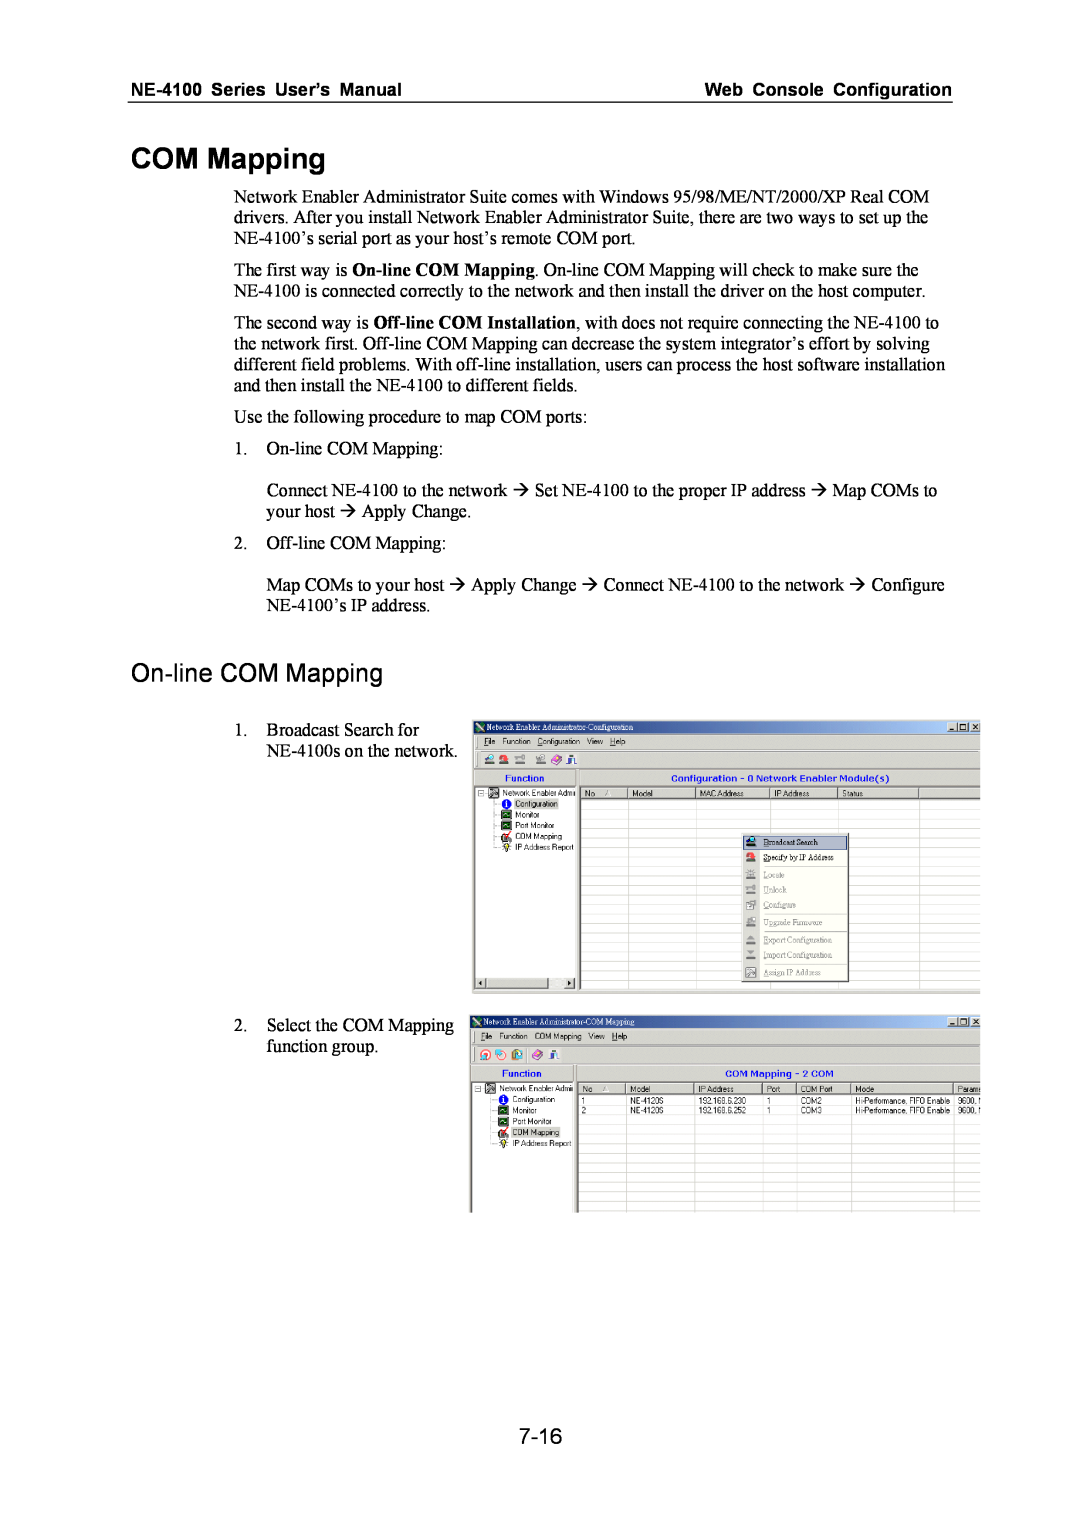 Moxa Technologies user manual On-line COM Mapping, 7-16, NE-4100 Series User’s Manual, Web Console Configuration 